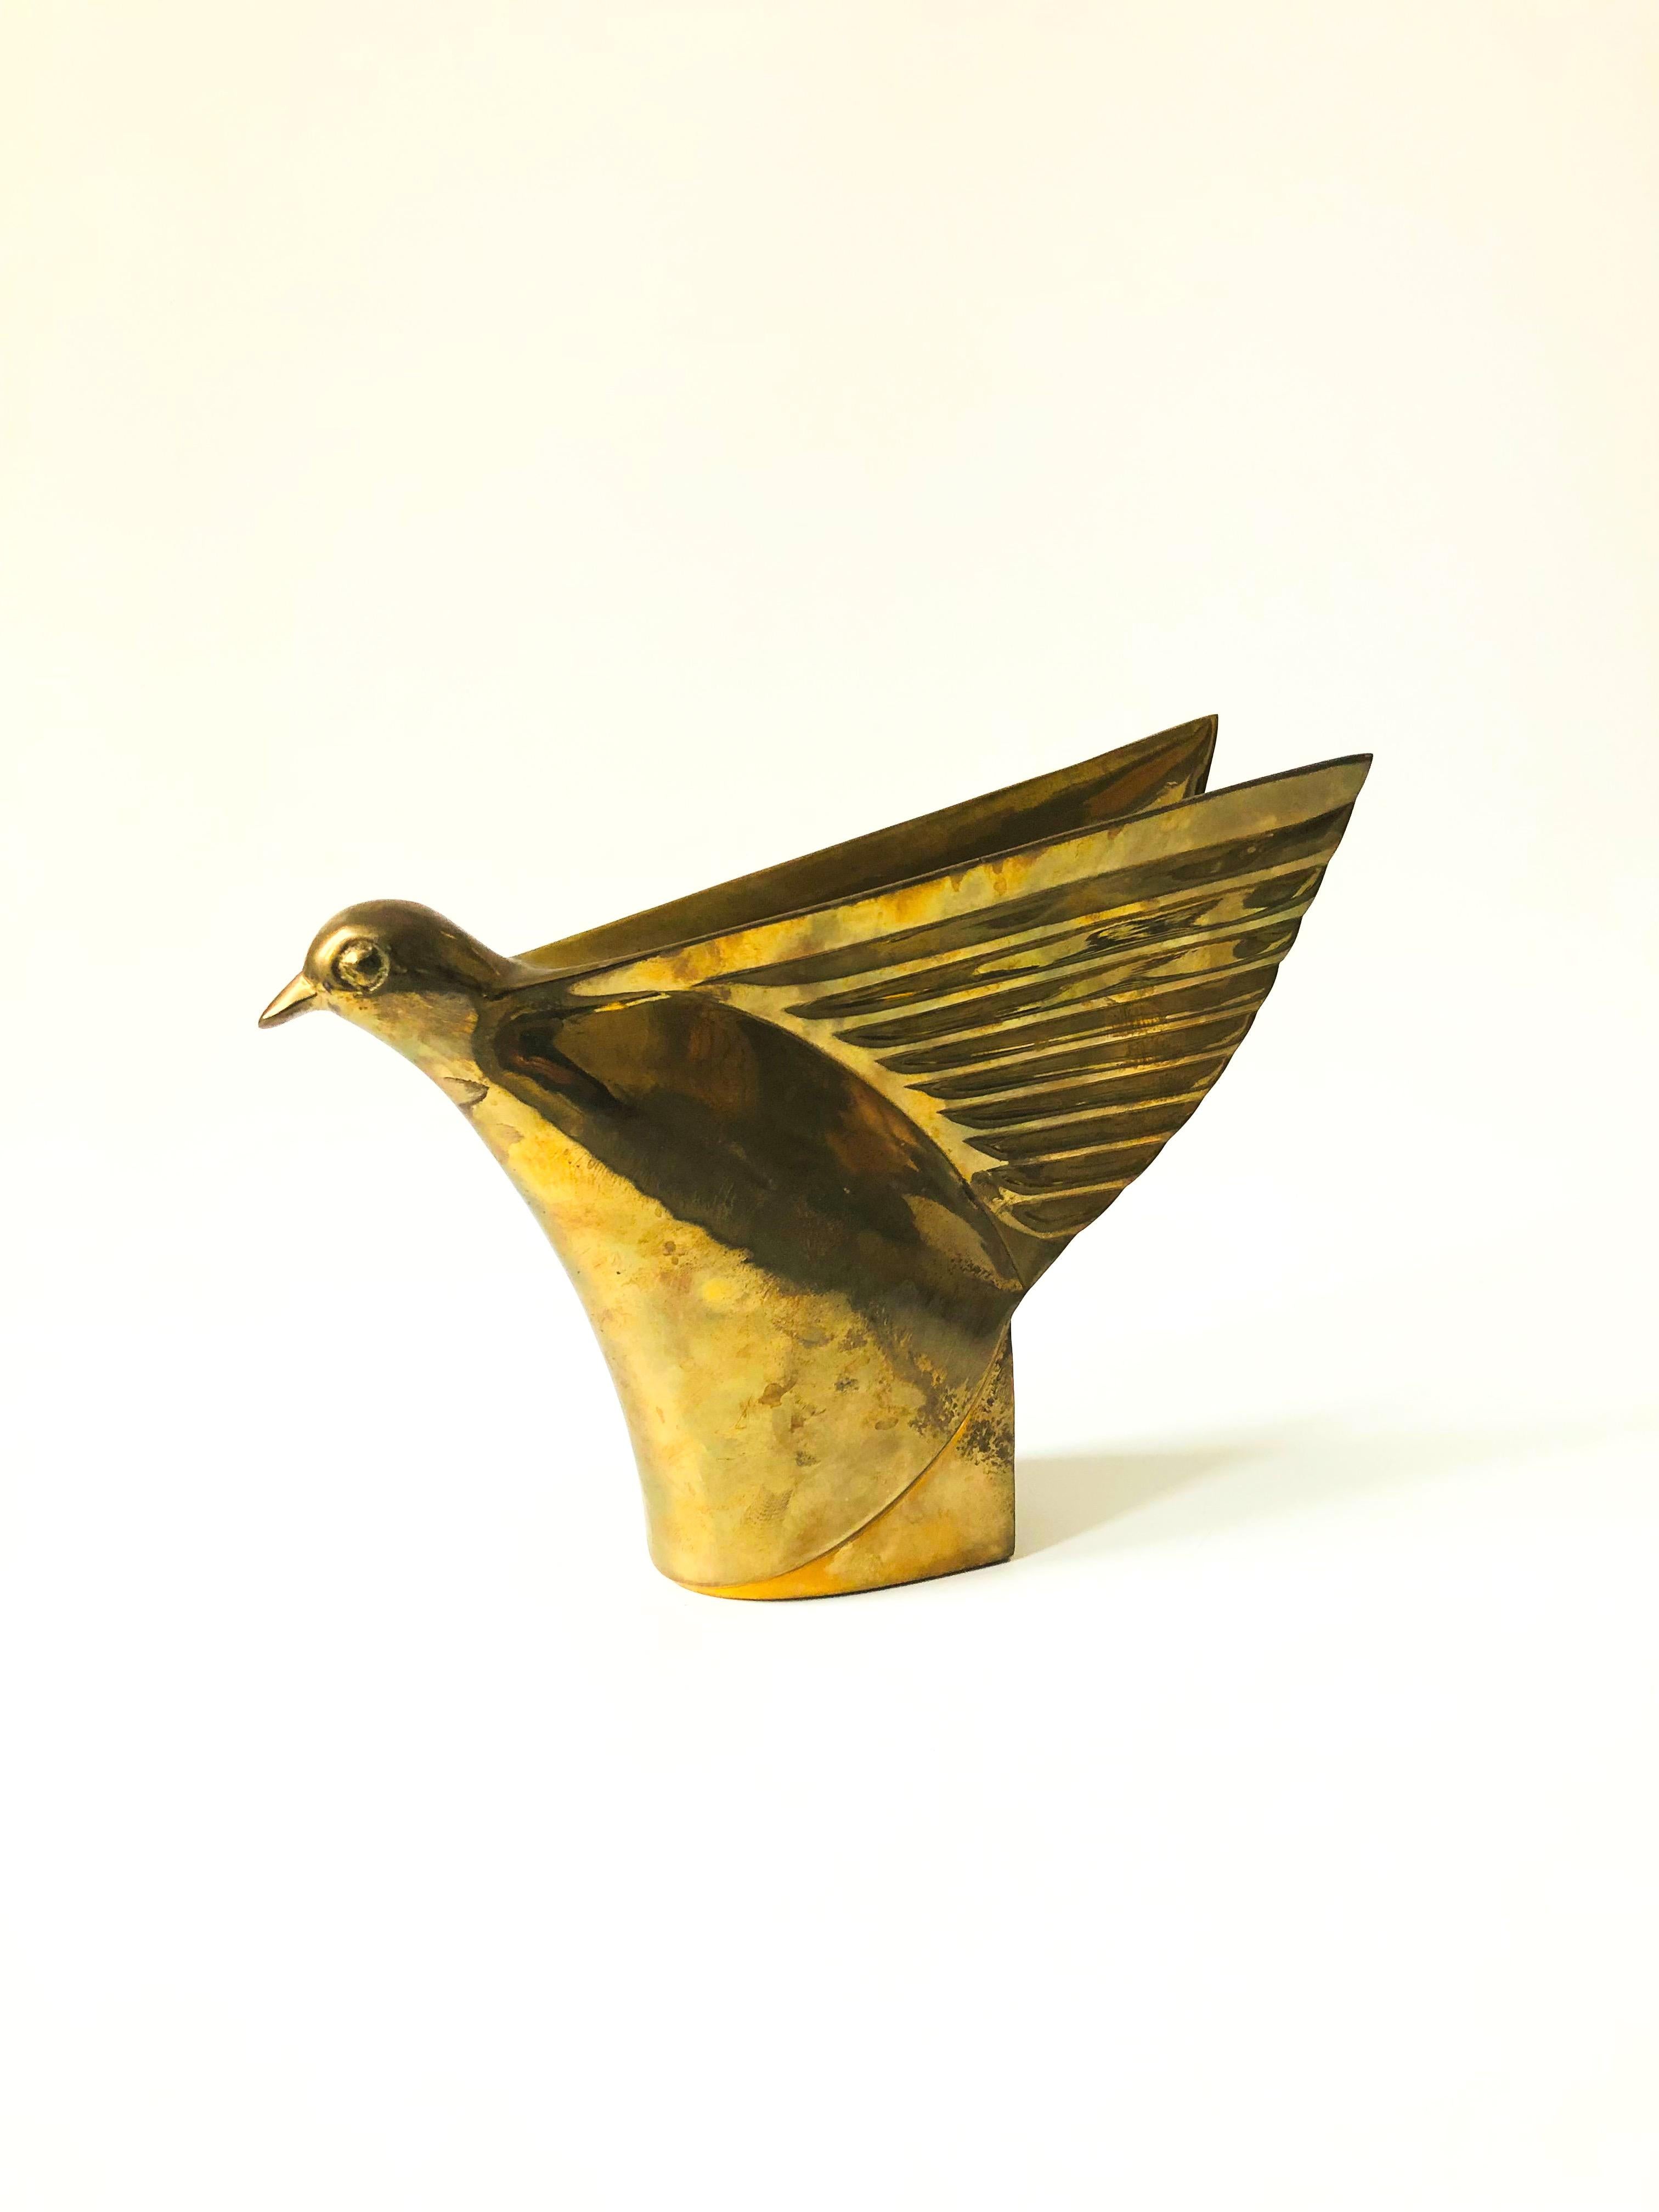 A beautiful brass bird sculpture by Dolby Cashier. Features great Art Deco stylized details.
 